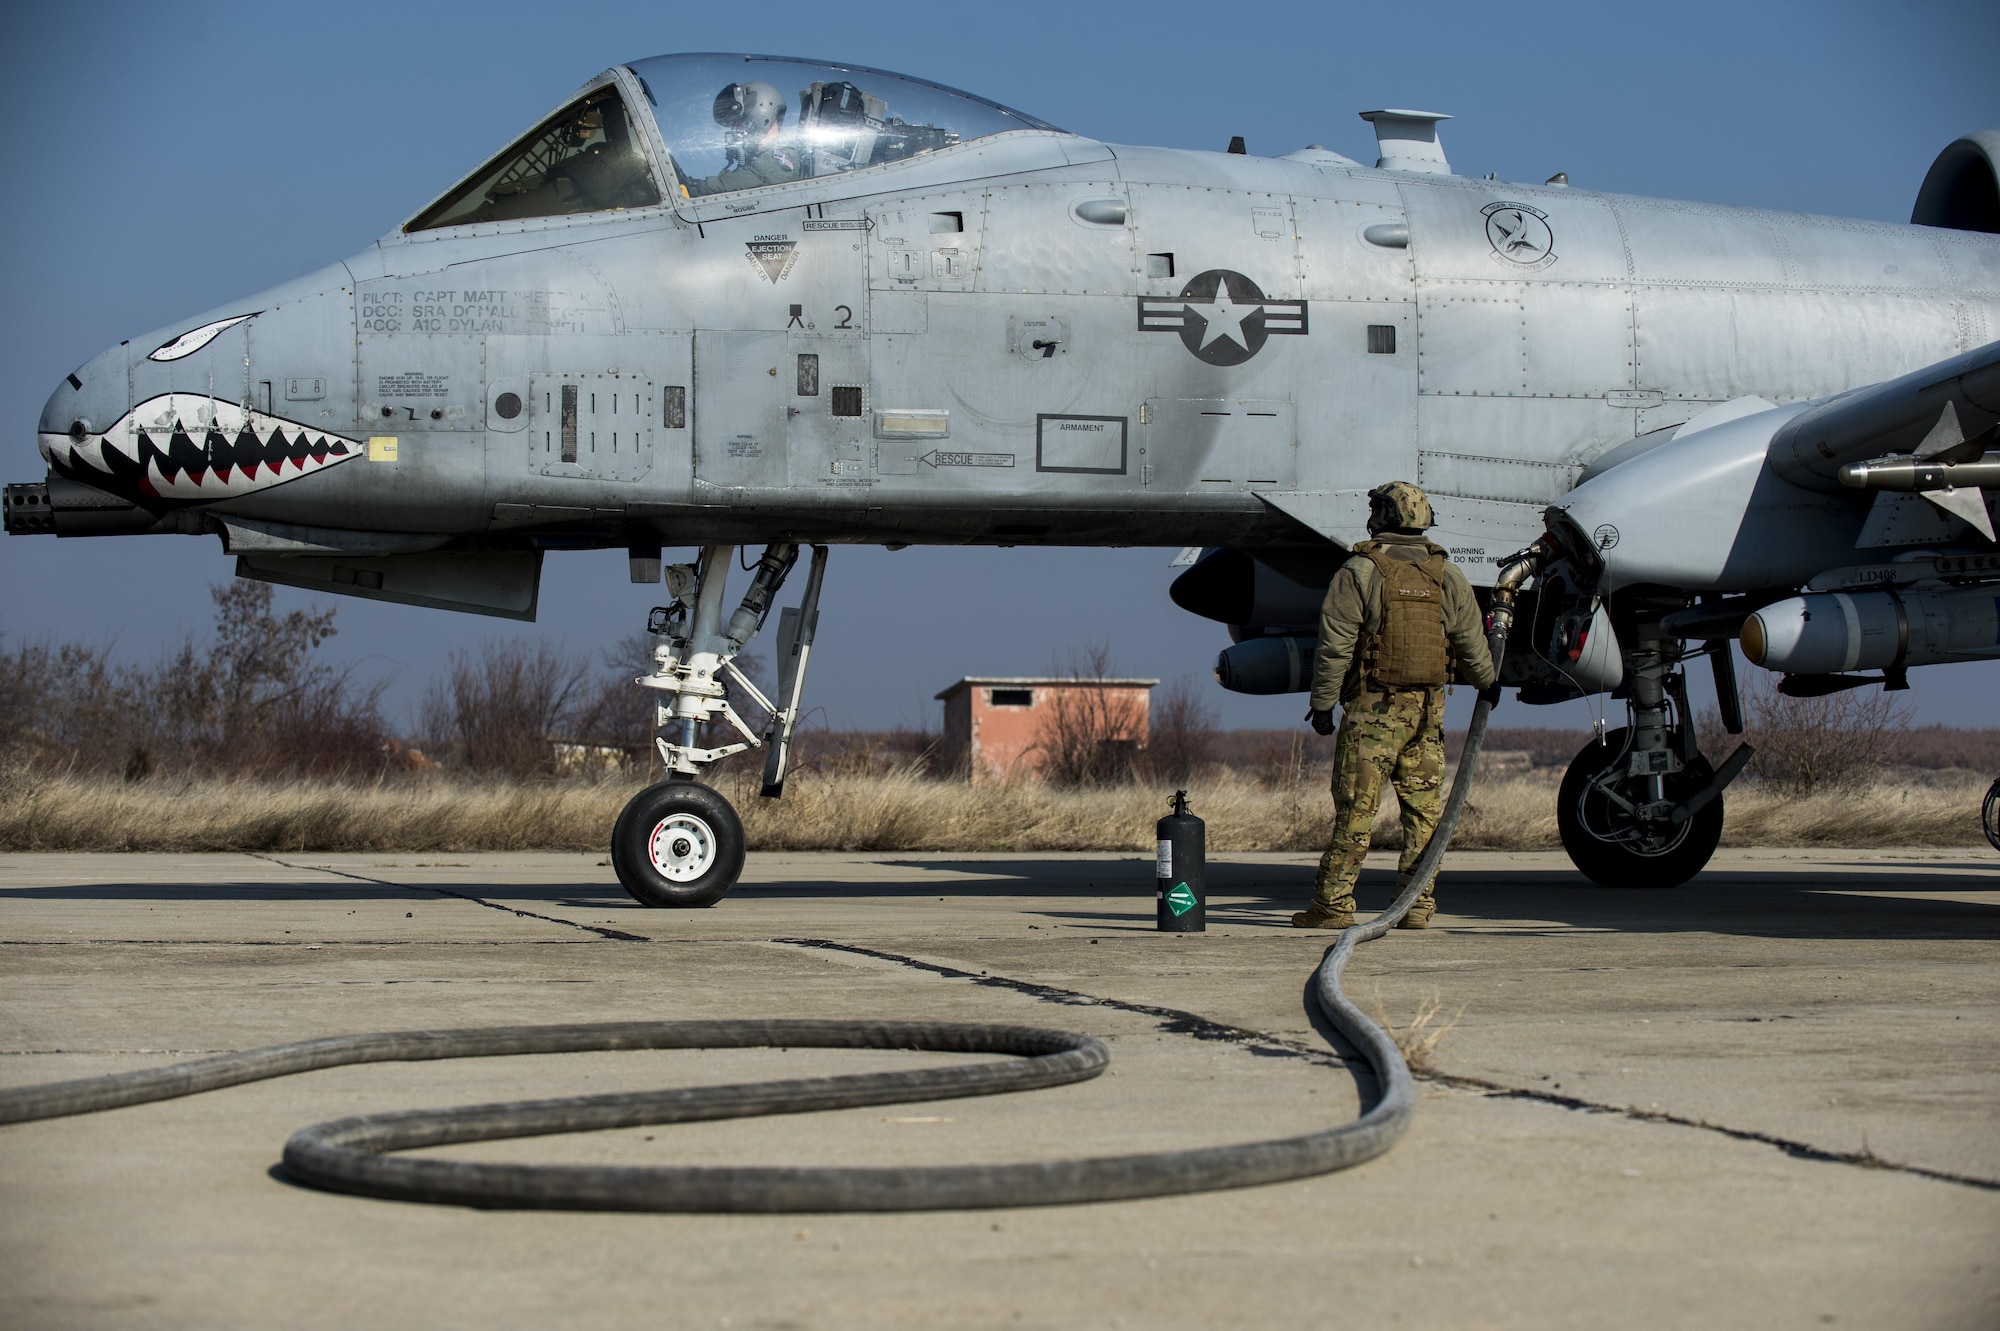 A member of the 100th Logistics Readiness Squadron refuels a 74th Expeditionary Fighter Squadron A-10C Thunderbolt II aircraft during forward area refueling point training at Plovdiv, Bulgaria, Feb. 9, 2016. A single A-10 usually receives approximately 2,000 pounds of fuel in a four-to-five-minute span during FARP training while a C-130 aircraft can provide tens of thousands of pounds of fuel if needed. (U.S. Air Force photo by Airman 1st Class Luke Kitterman/Released)